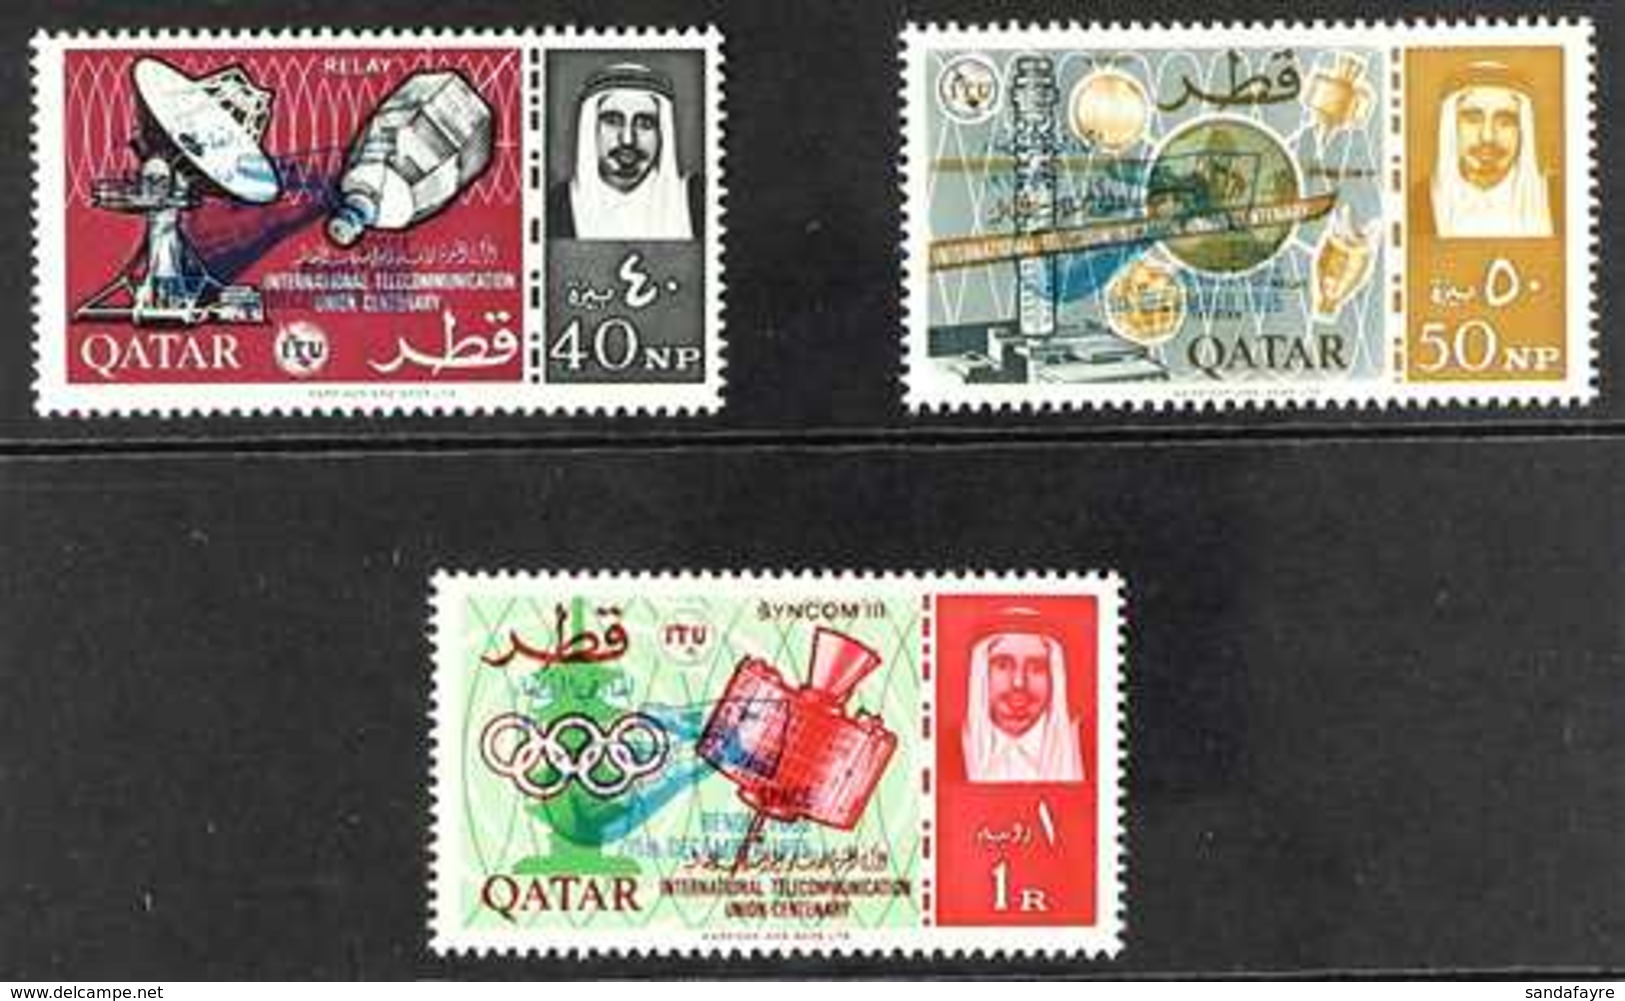 1966 Space Rendezvous 40np To 1R (Scott 96/98) Set With Overprint In BLUE, Never Hinged Mint. (3 Stamps) For More Images - Qatar